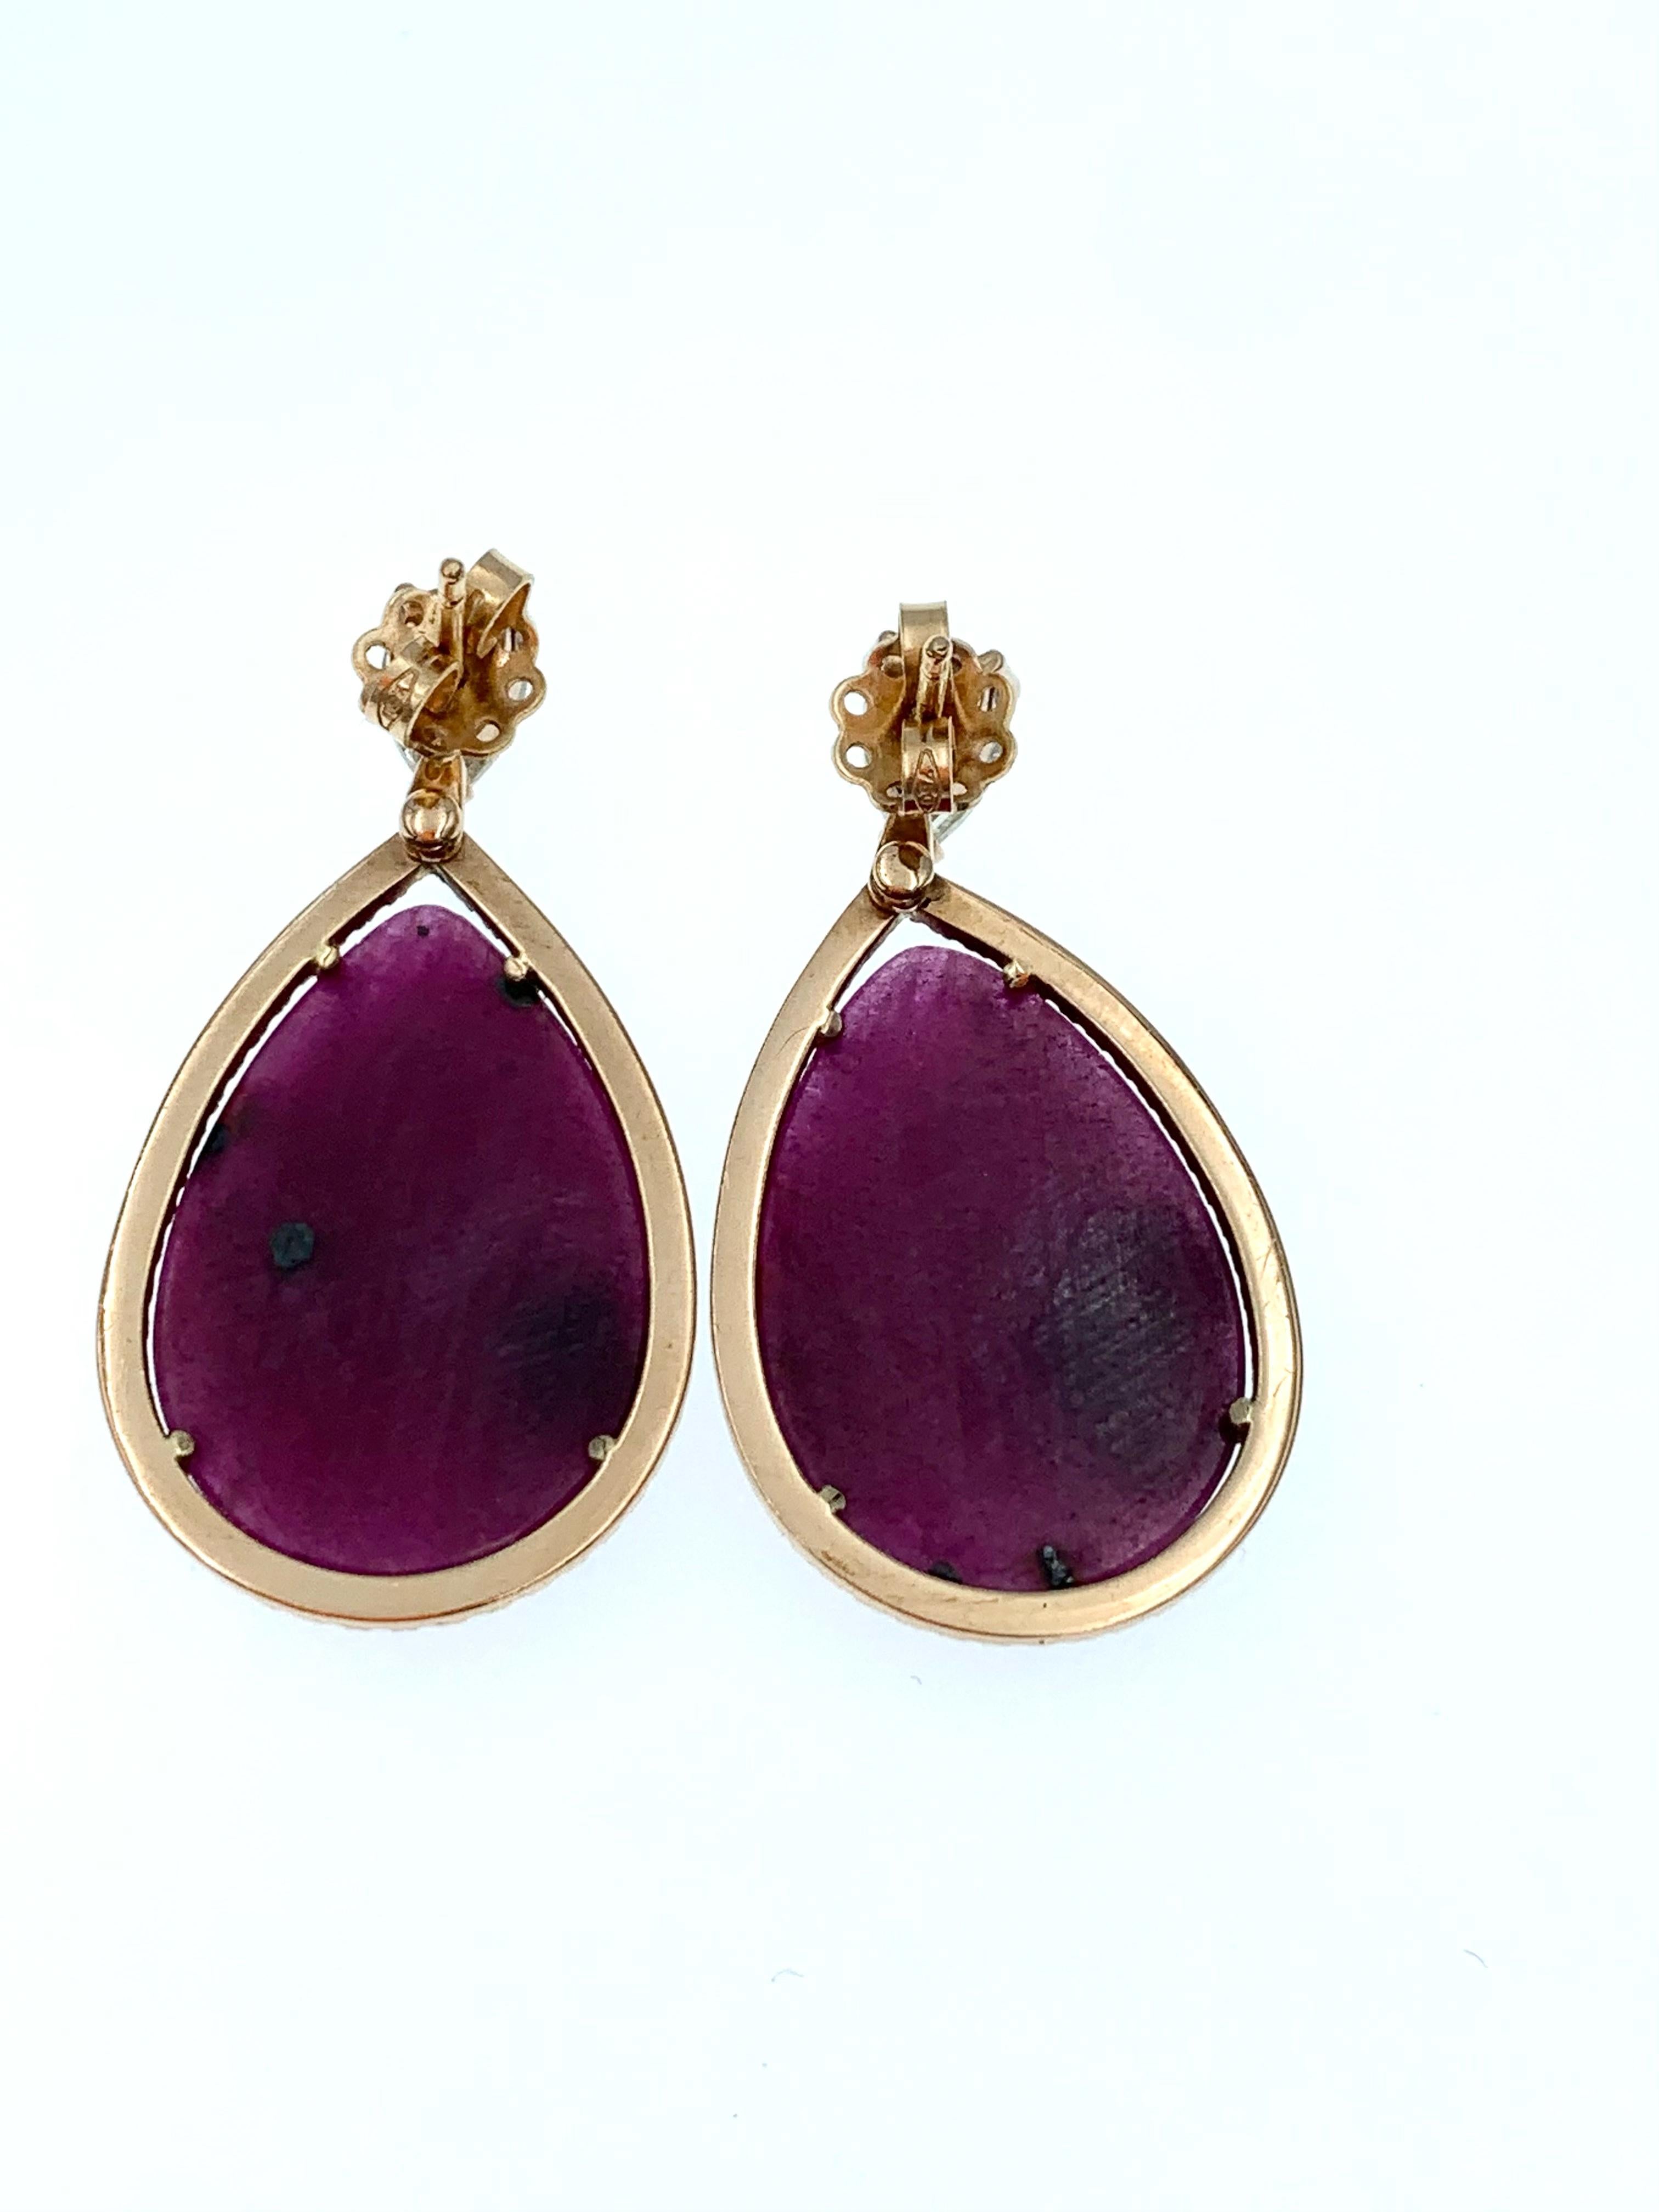 Hand made in 9 karat Rose Gold these pear shaped natural Ruby slices with a weight of approximately 36 carats in total are surrounded by a halo of black diamonds, hanging off a set of champagne coloured diamonds, approximately 1.20 carats in total.